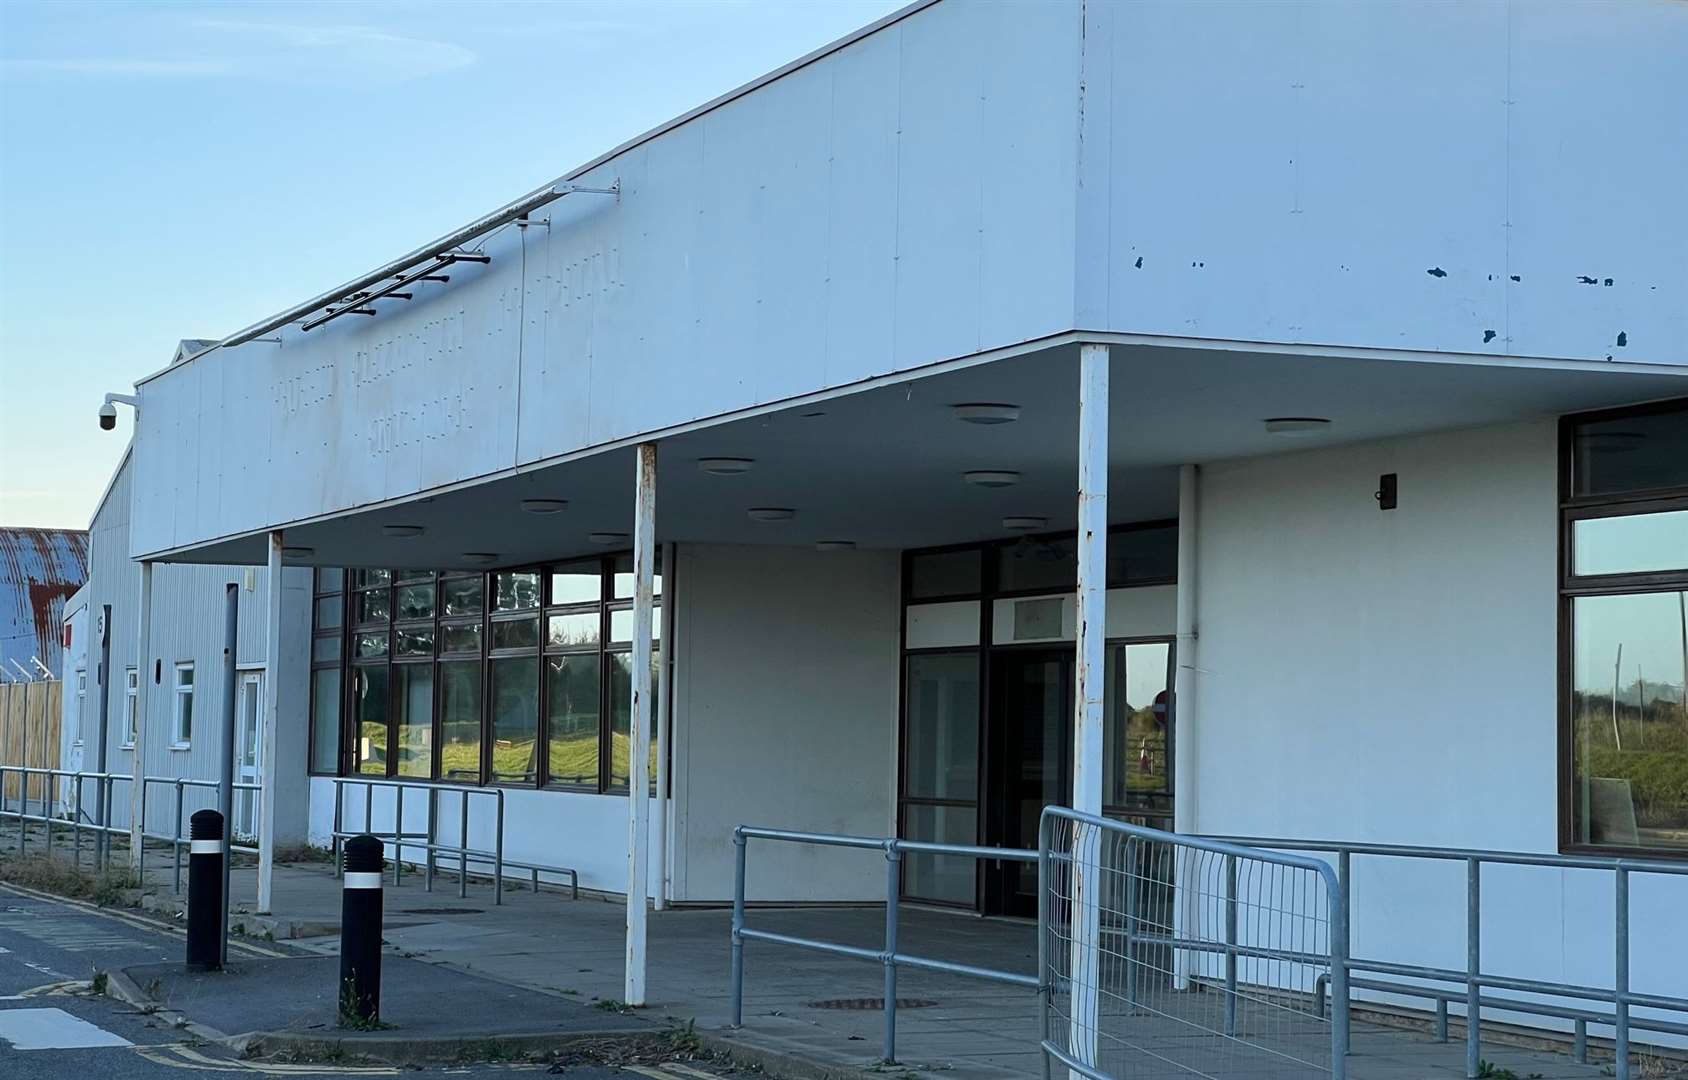 Exterior of the Manston Airport passenger terminal building as it looks today